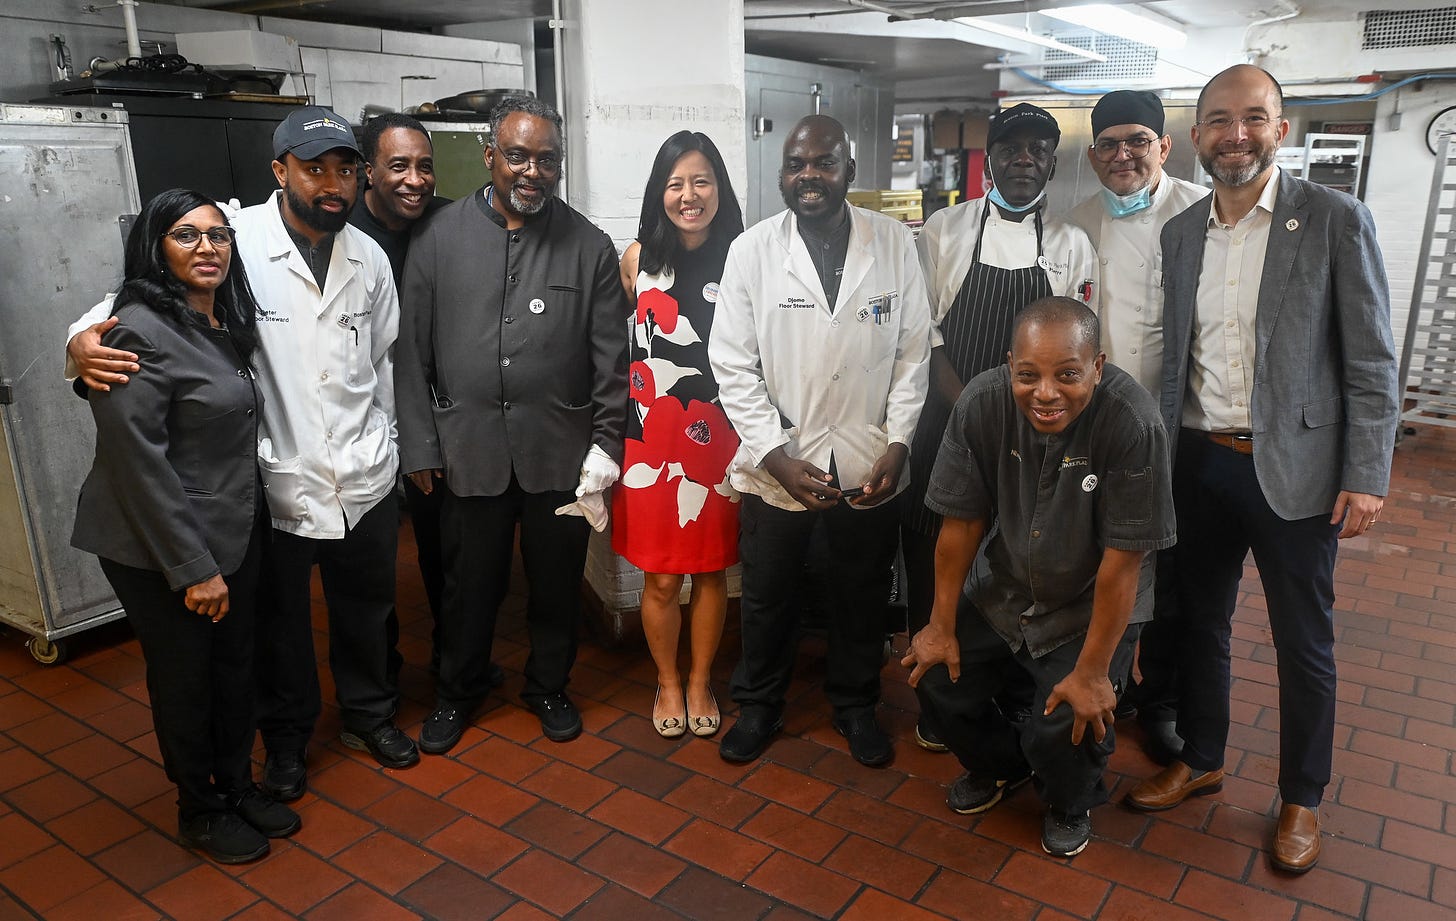 Michelle smiles for a photo with workers in the kitchen before the event